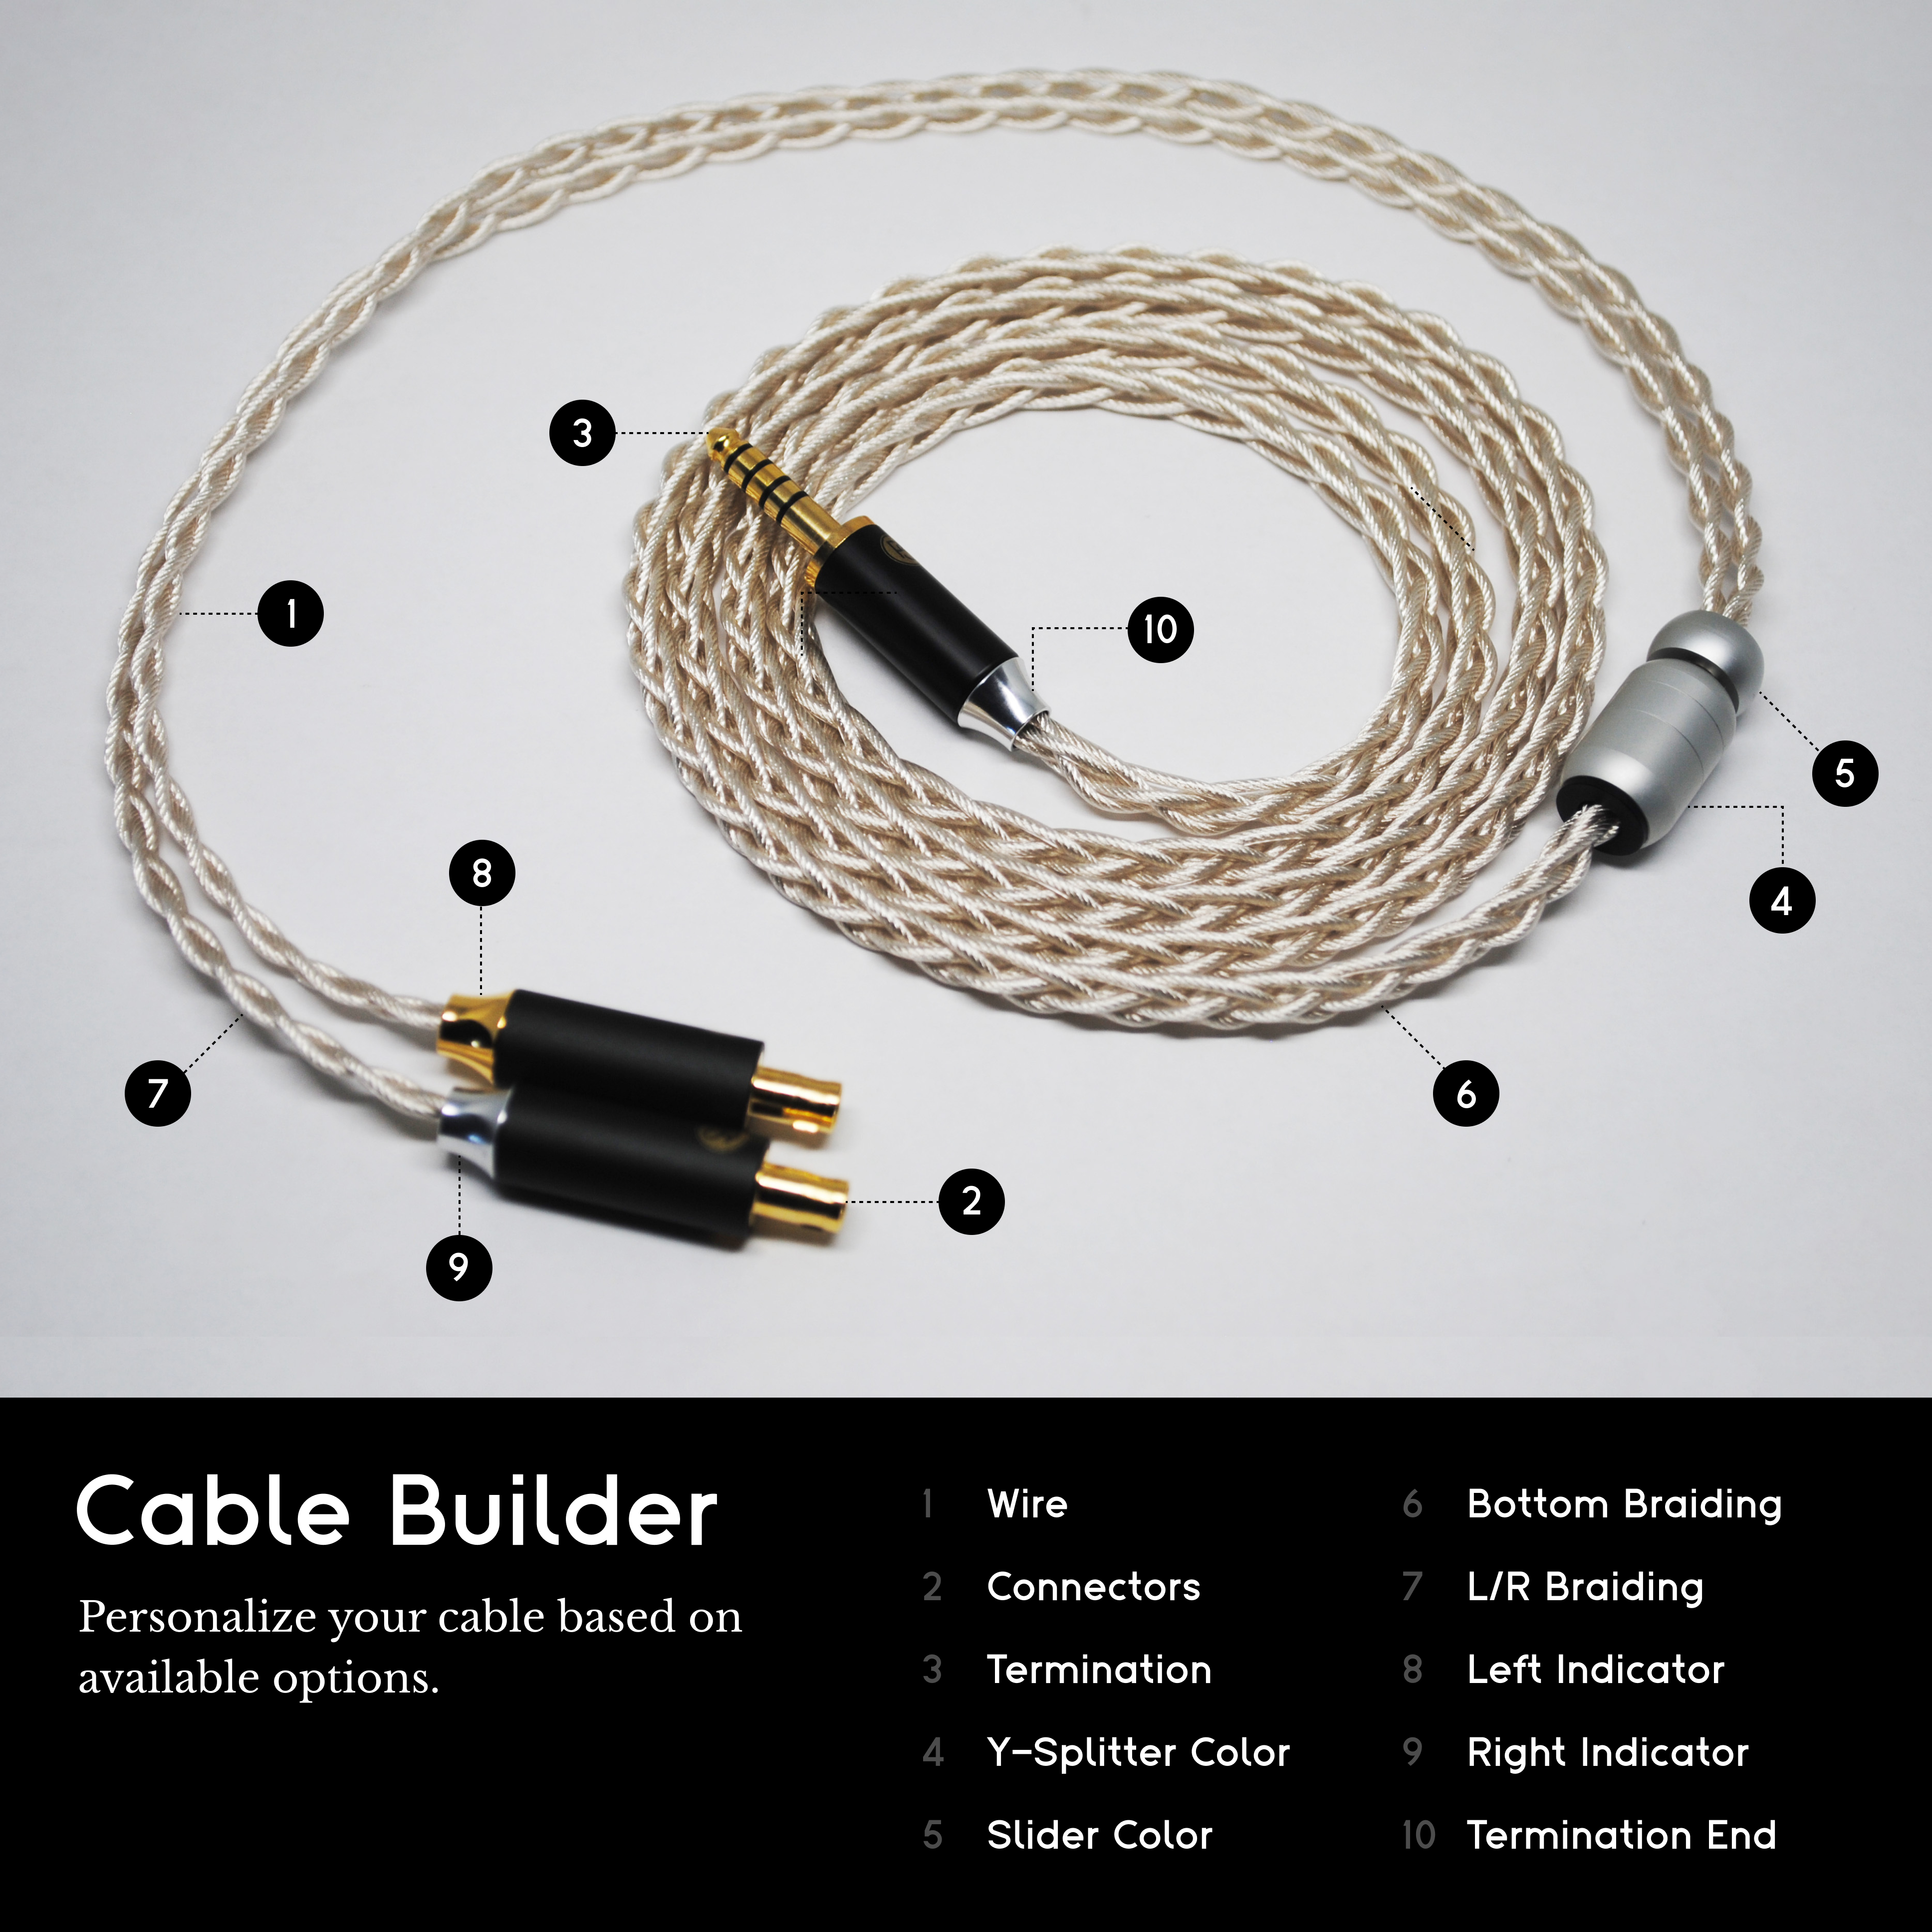 How to Choose the Correct Audio Cable Splitter for Headphones?